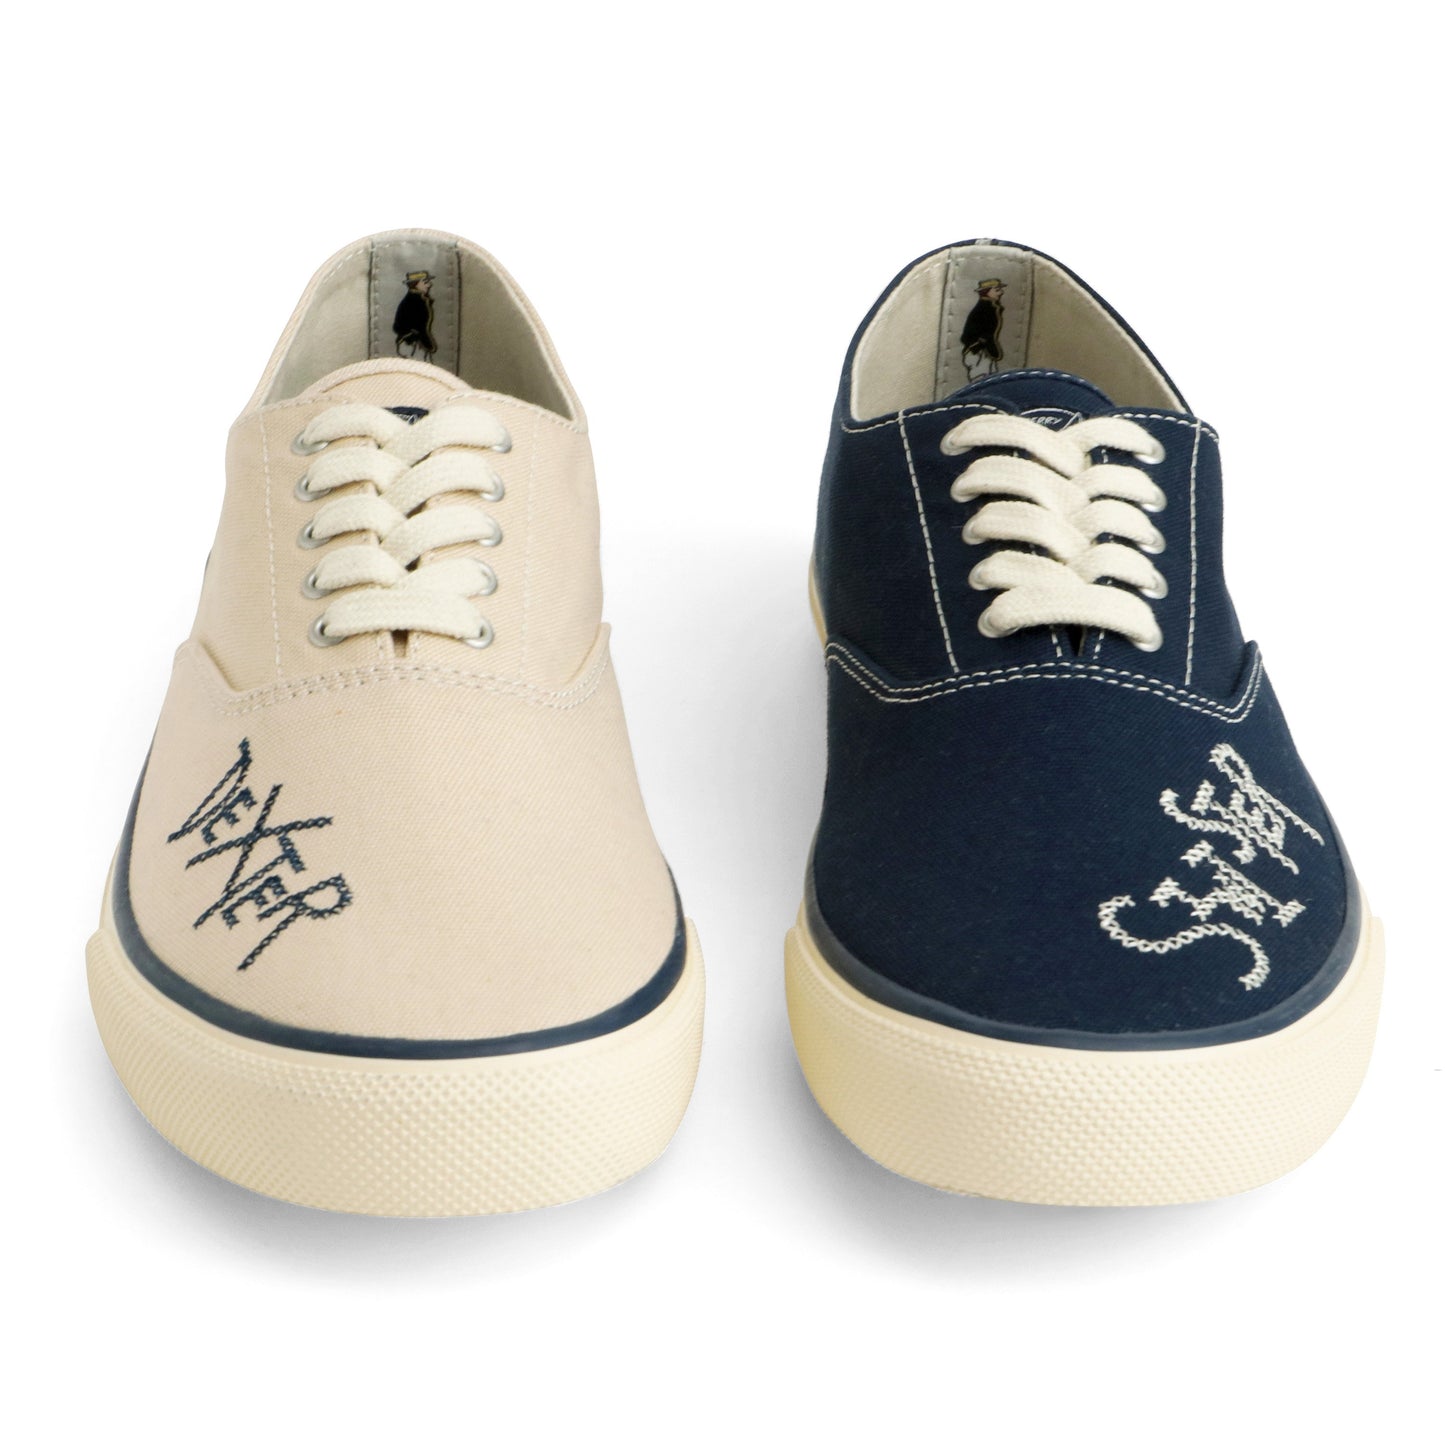 Sperry x Rowing Blazers Cloud CVO Embroidered Dexter & Sinister Sneaker